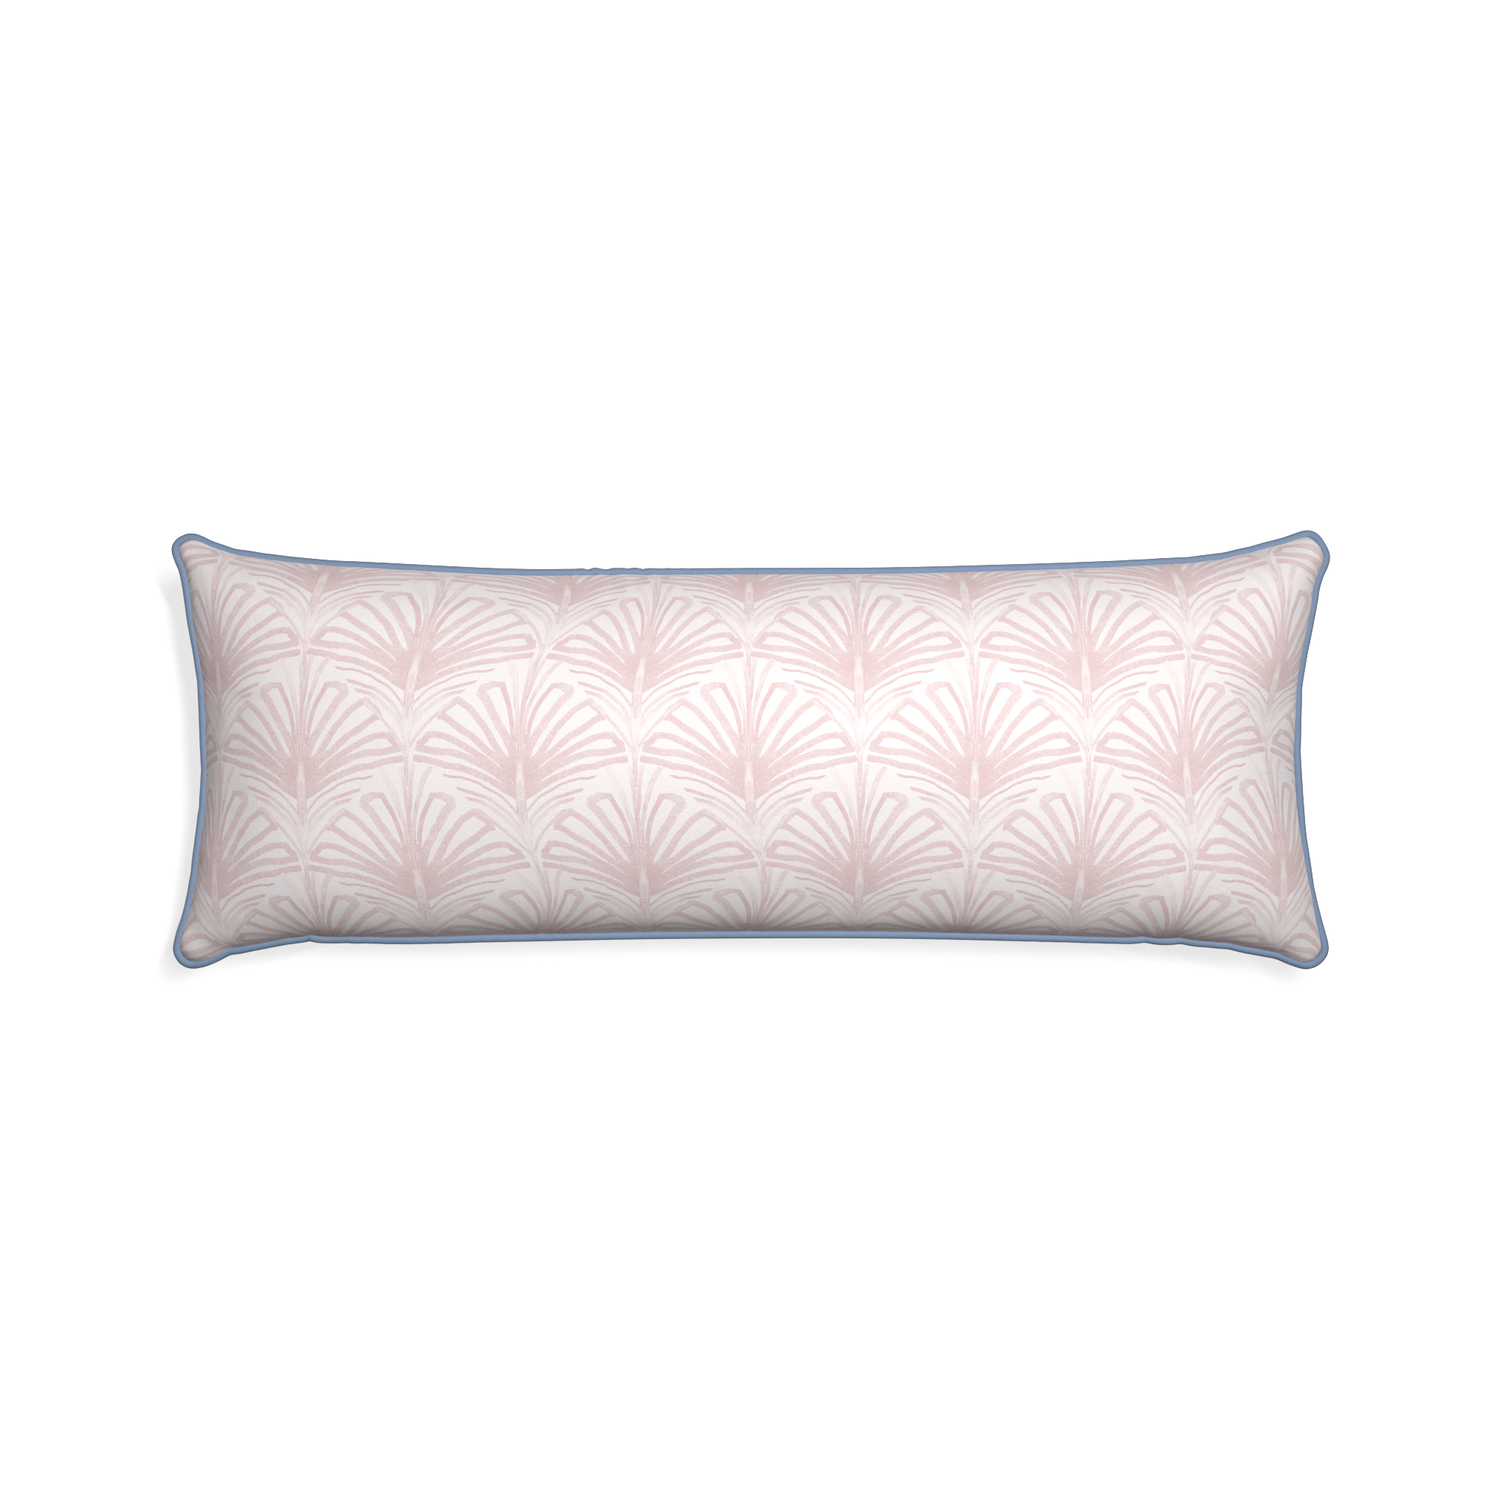 Xl-lumbar suzy rose custom pillow with sky piping on white background